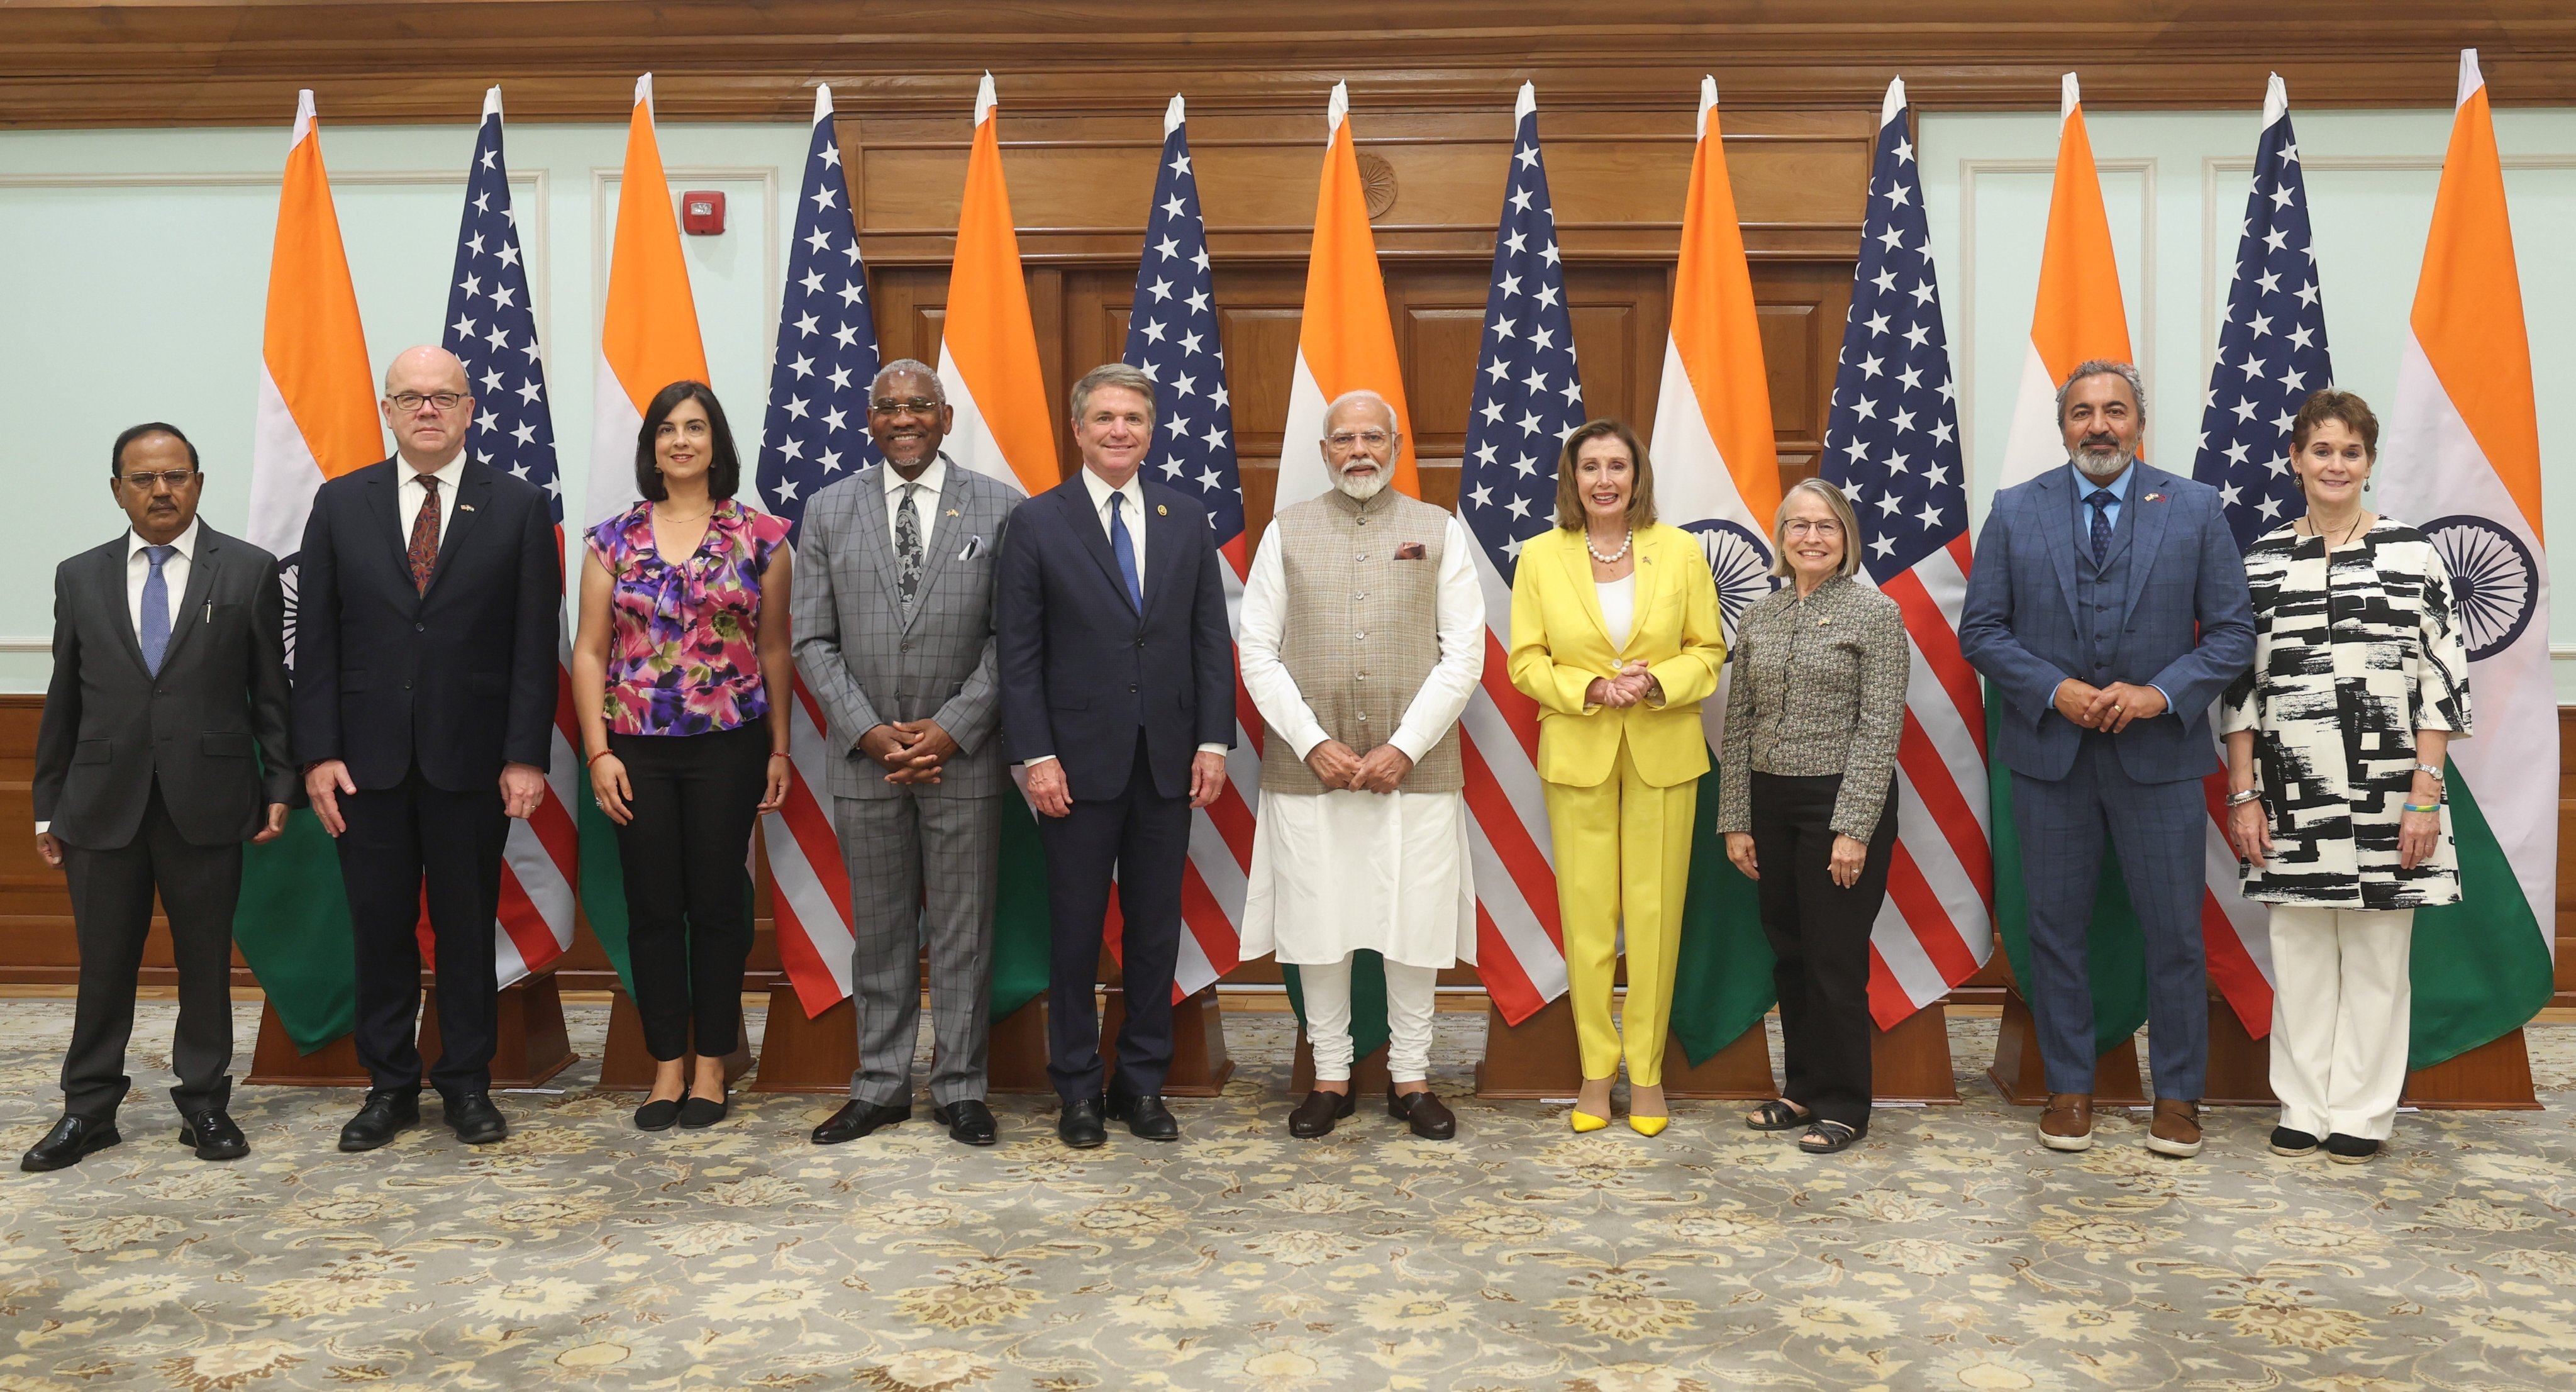 Indian Prime Minister Narendra Modi (centre) poses with former House speaker Nancy Pelosi (on his left) and chairman of the House Foreign Affairs Committee Michael McCaul (on his right). Photo: Twitter/@narendramodi